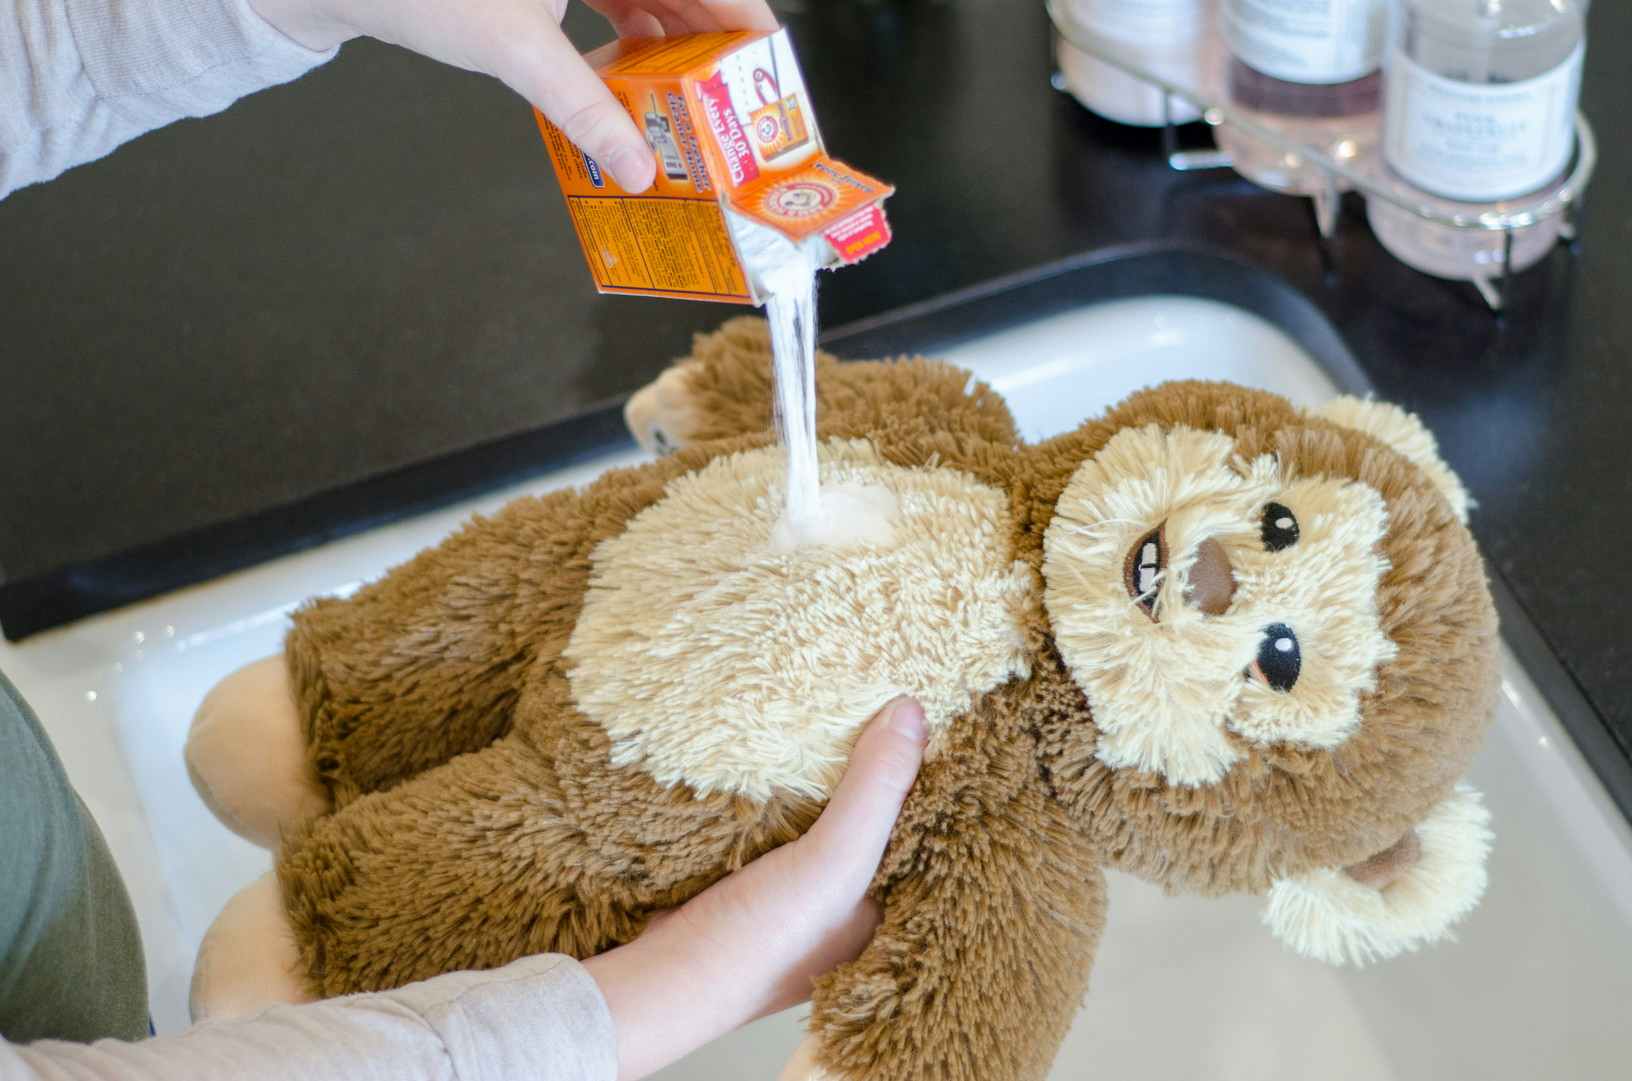 Freshen stuffed animals by sprinkling baking soda and waiting 15 minutes.